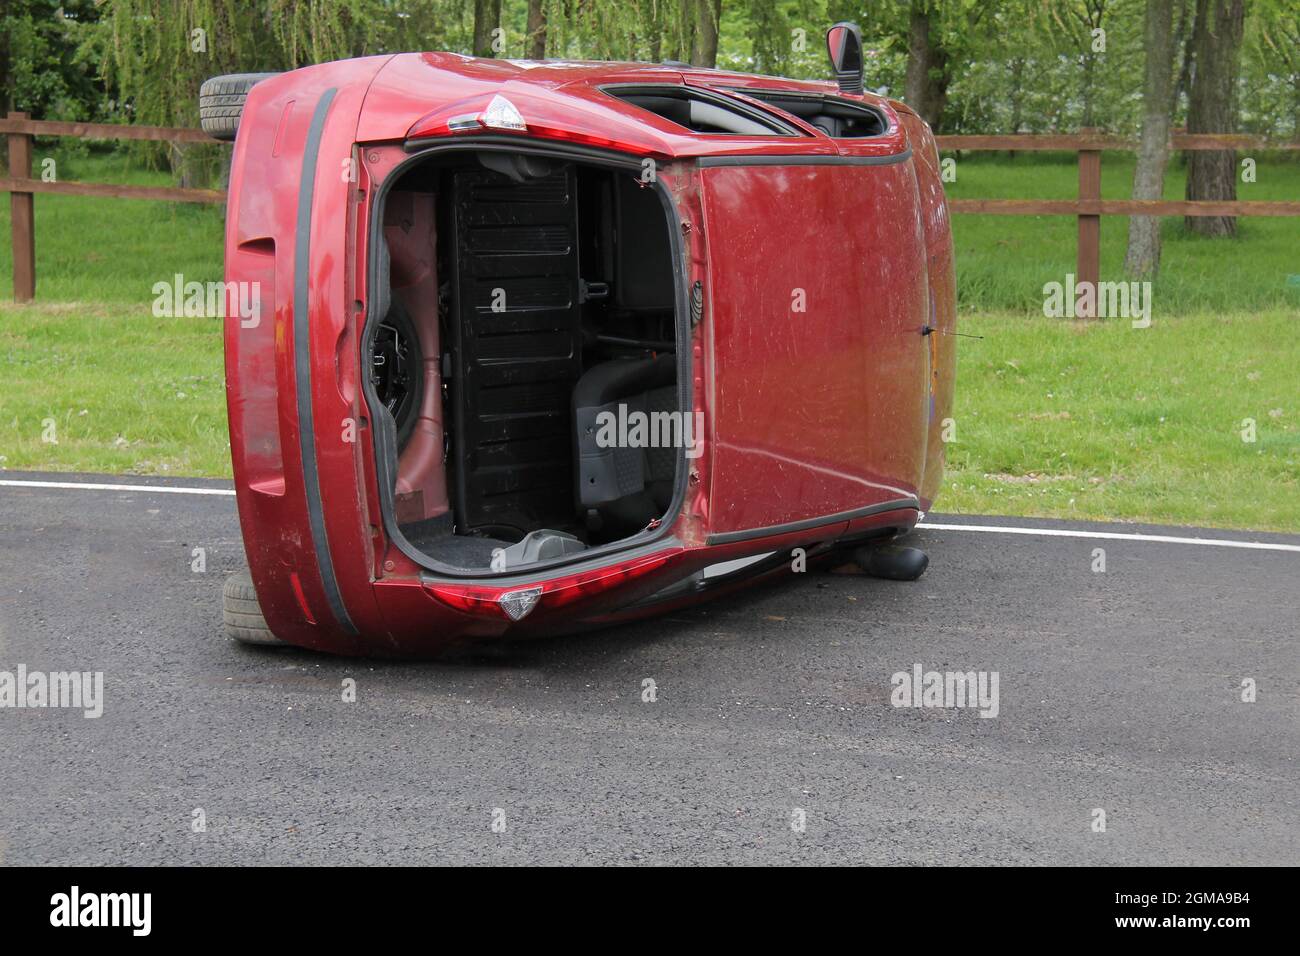 A Smashed Car Accident Wreck on its Side. Stock Photo